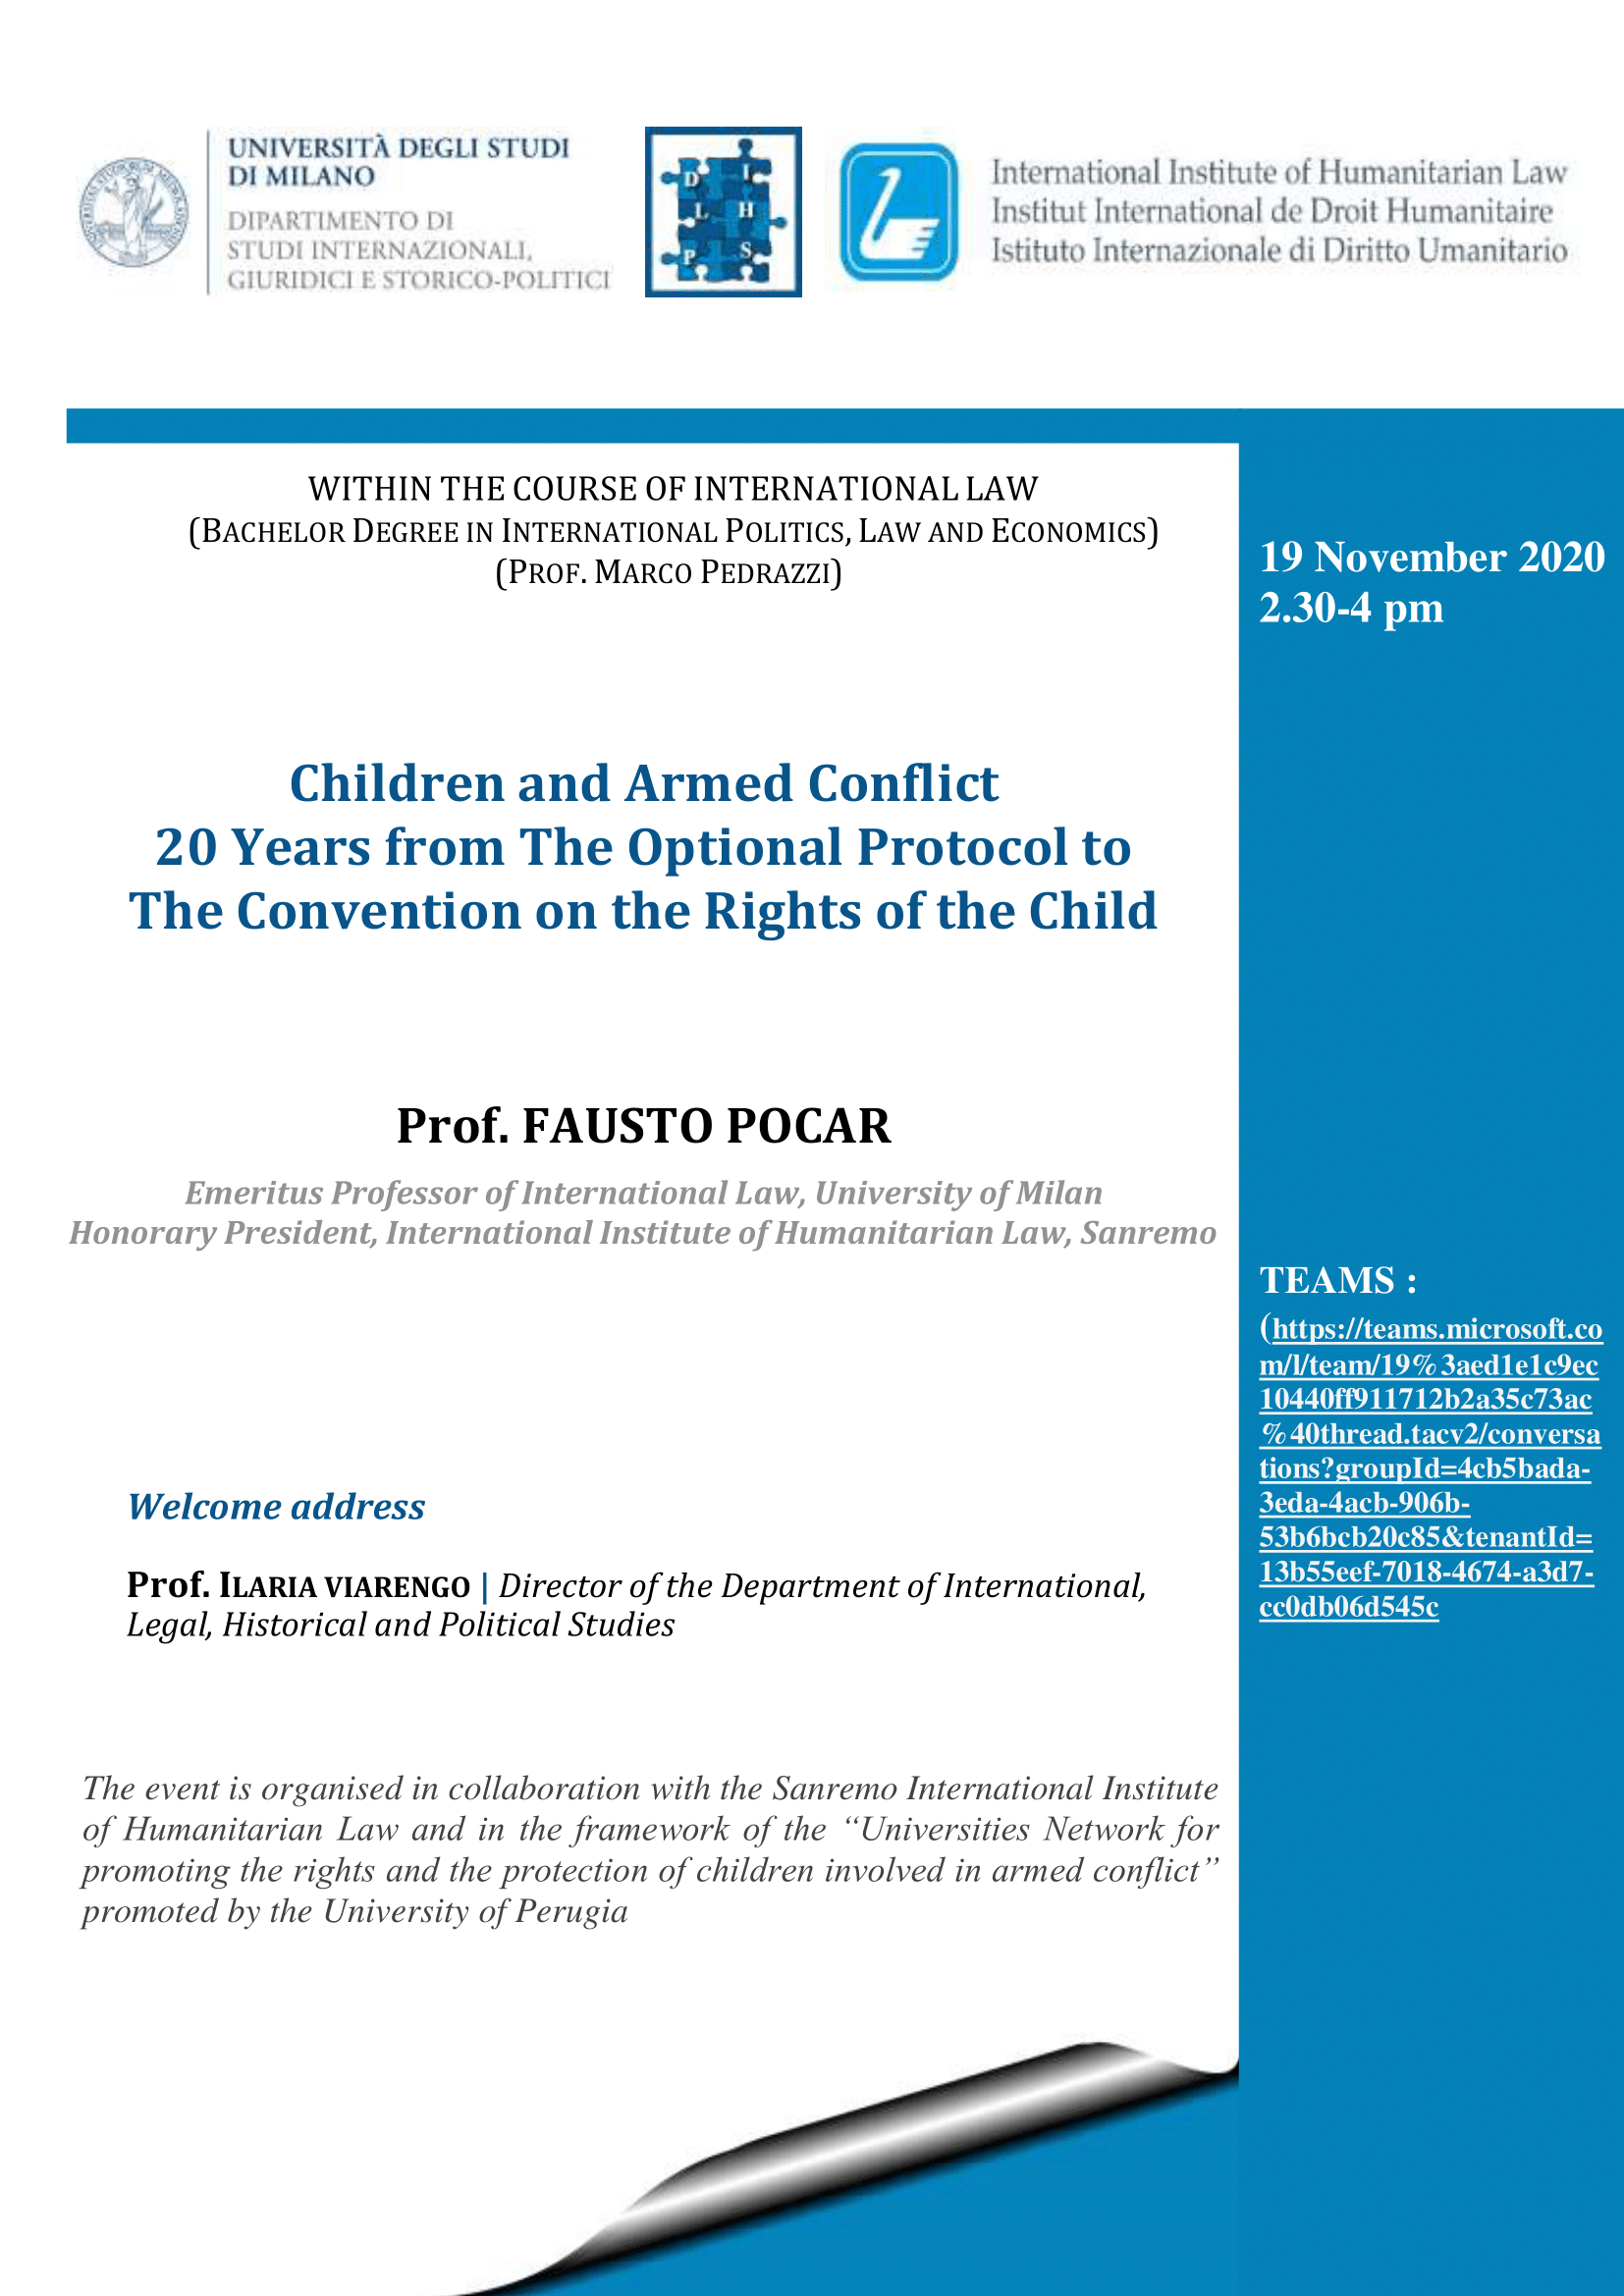 “Children and Armed Conflict 20 Years from The Optional Protocol to The Convention on the Rights of the Child”, online conference tomorrow – Register here